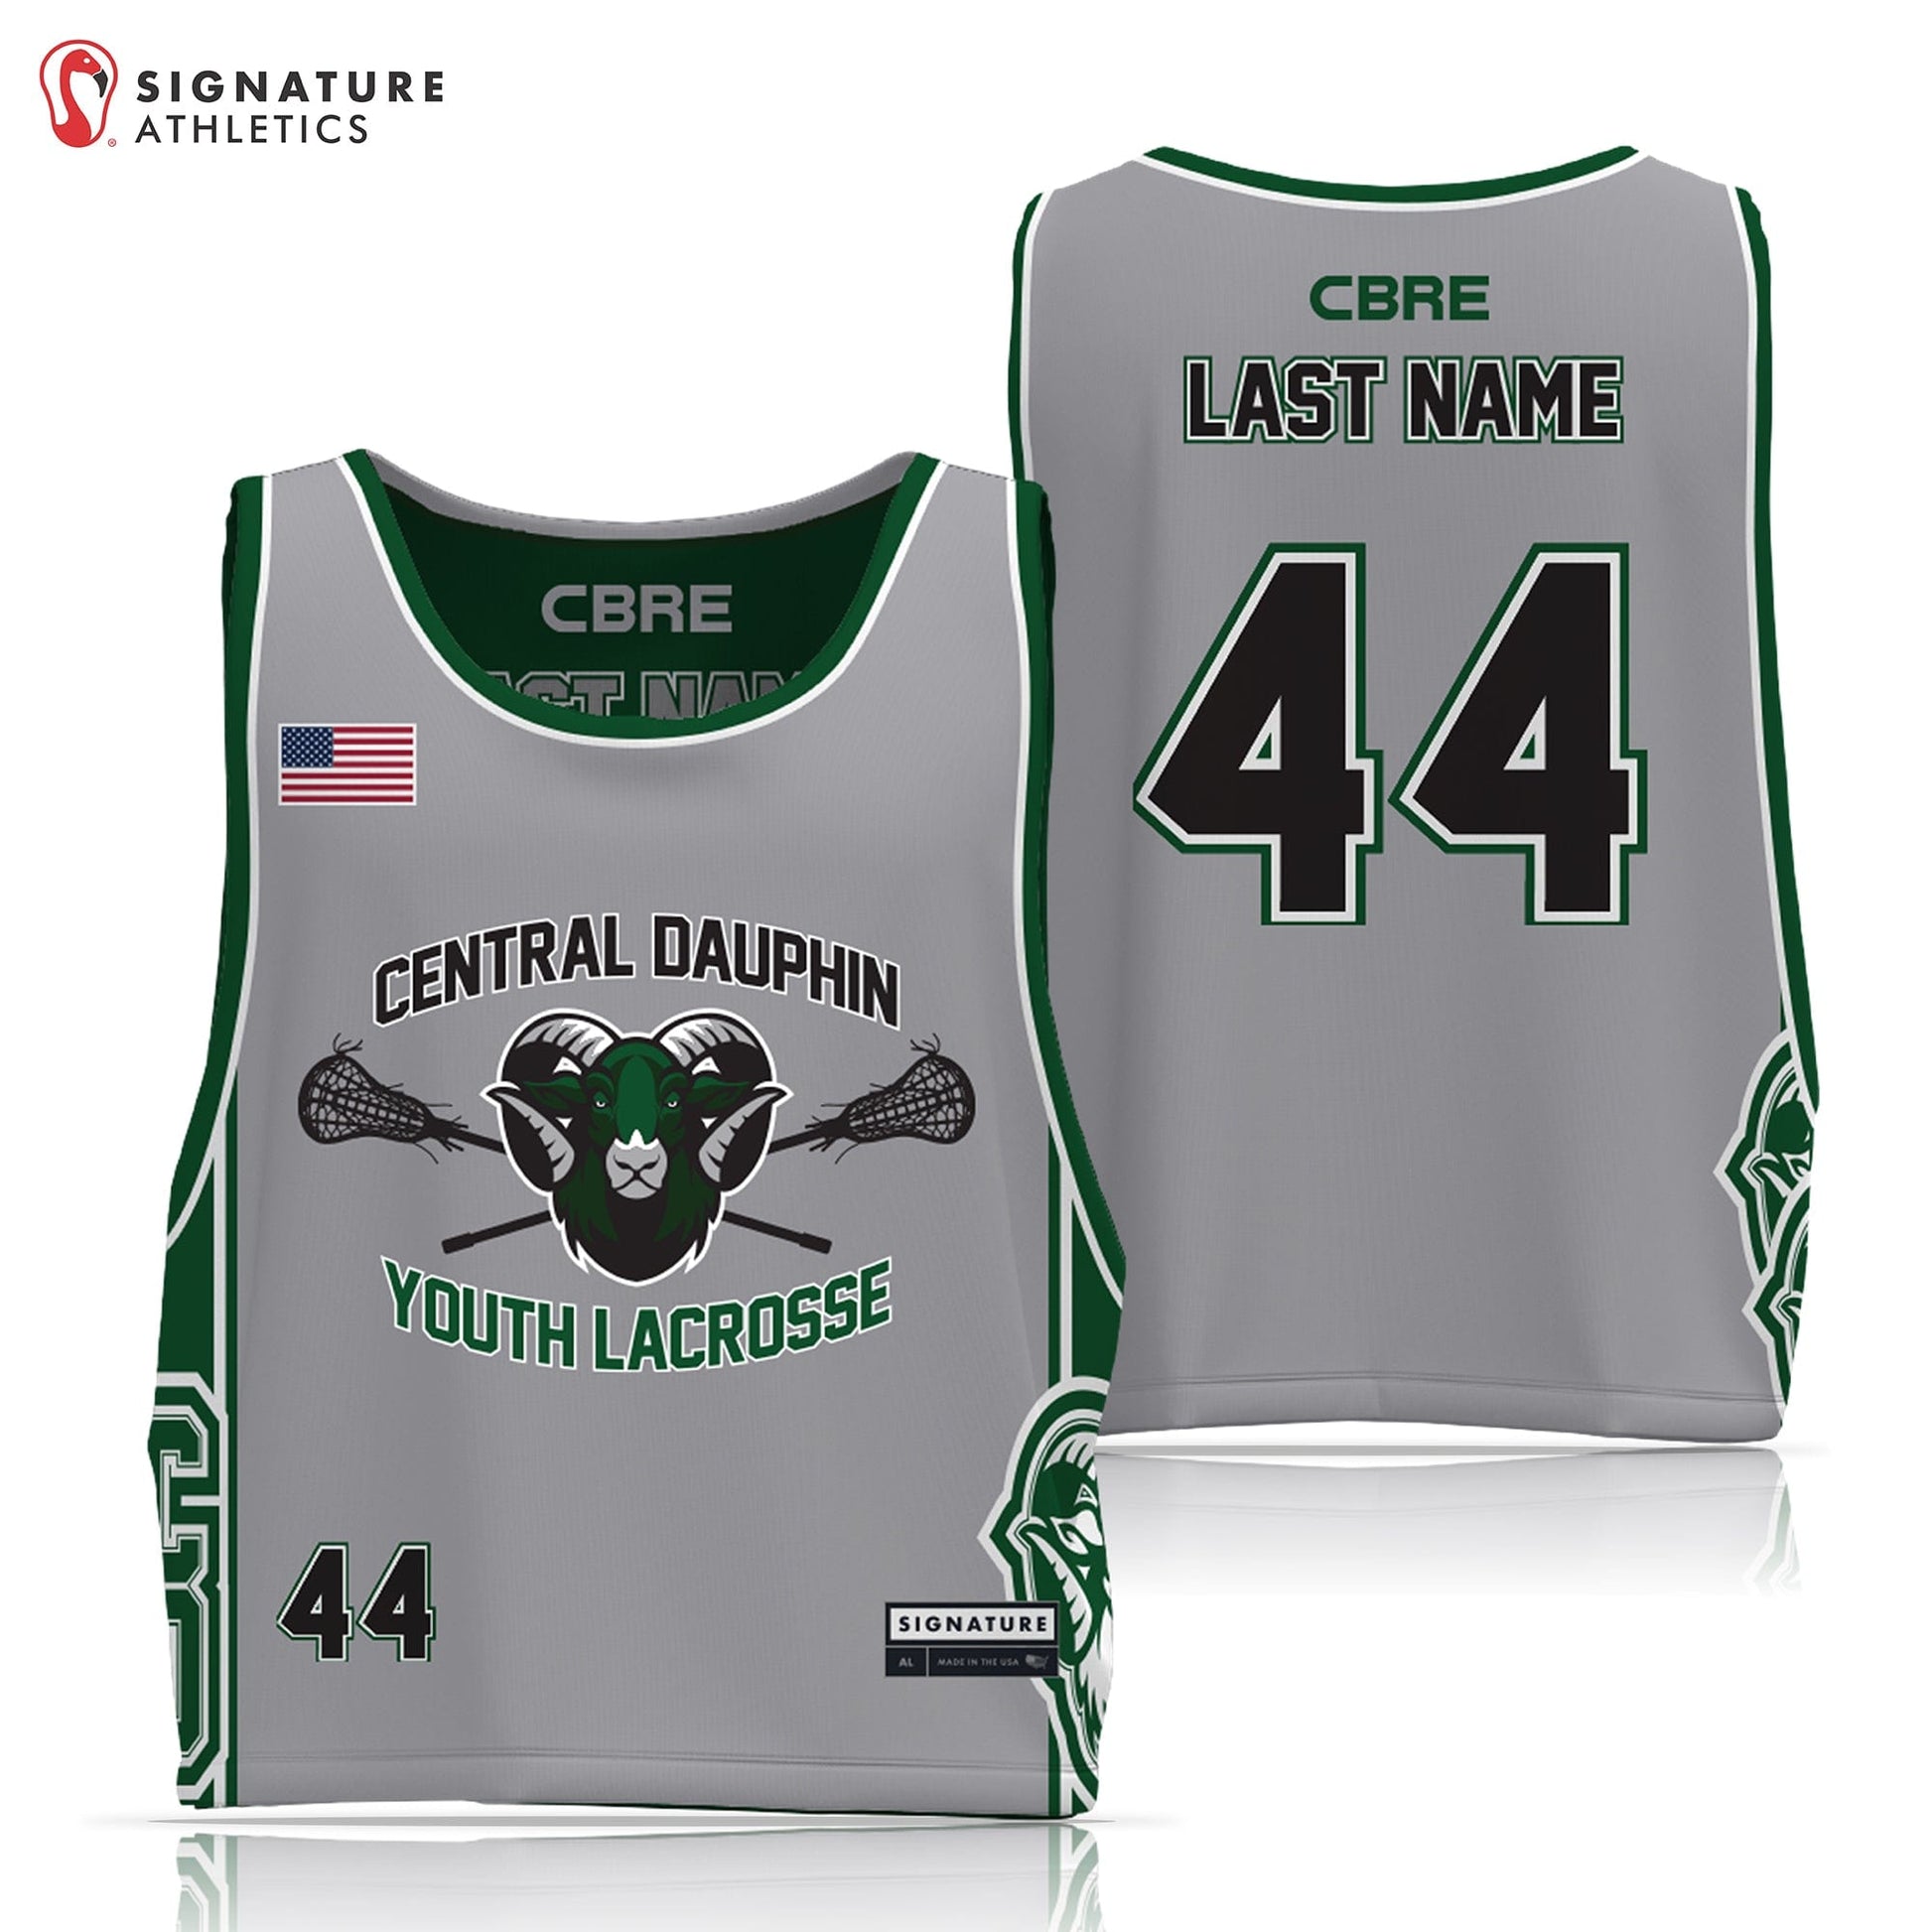 Central Dauphin Lacrosse Men's 2 Piece Player Game Package Signature Lacrosse